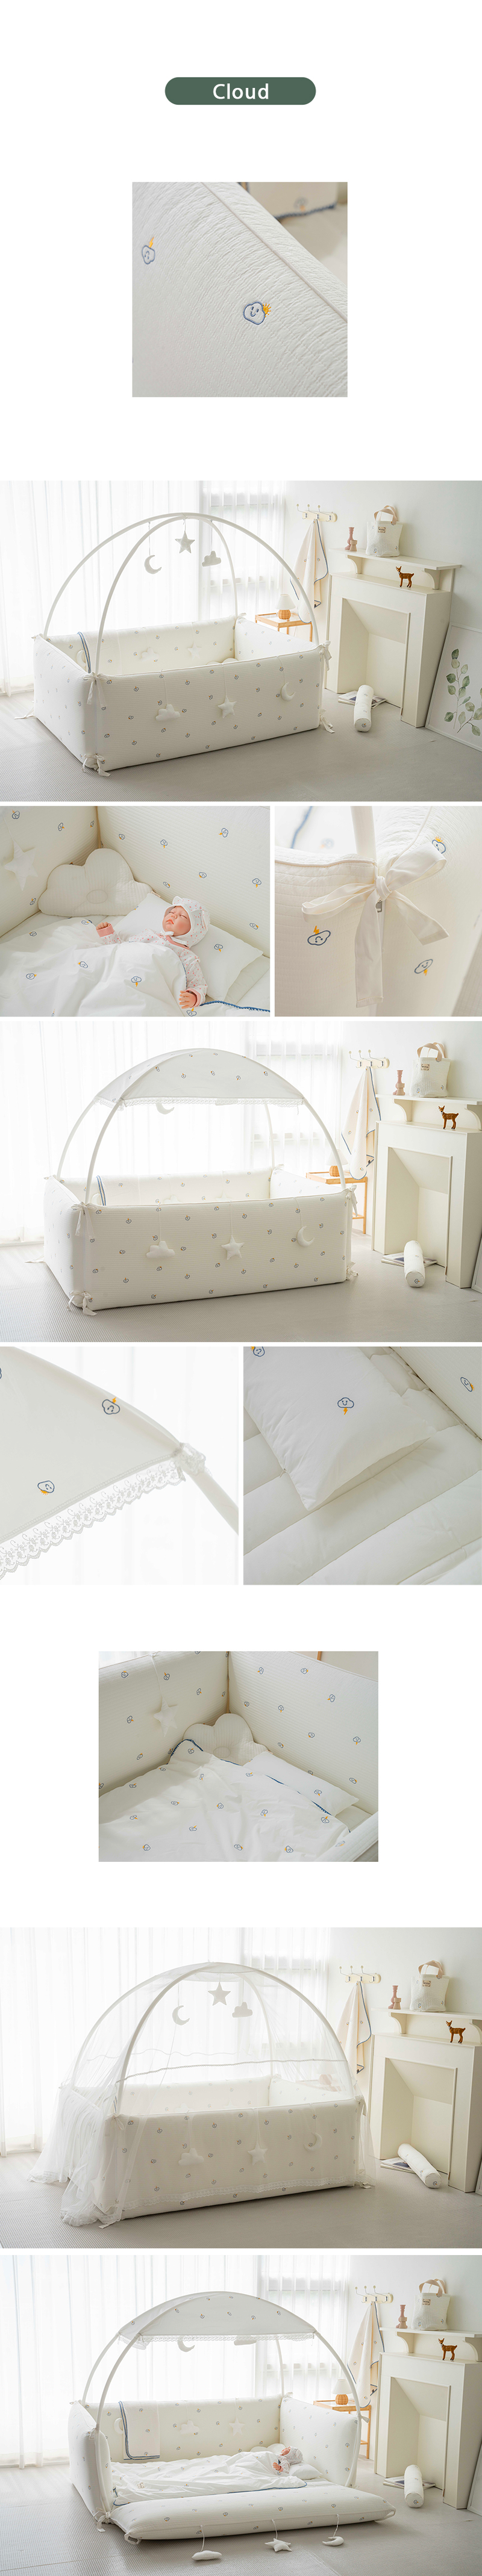 LOLBaby Cotton Embroidery Bumper Bed - Canopy ONLY